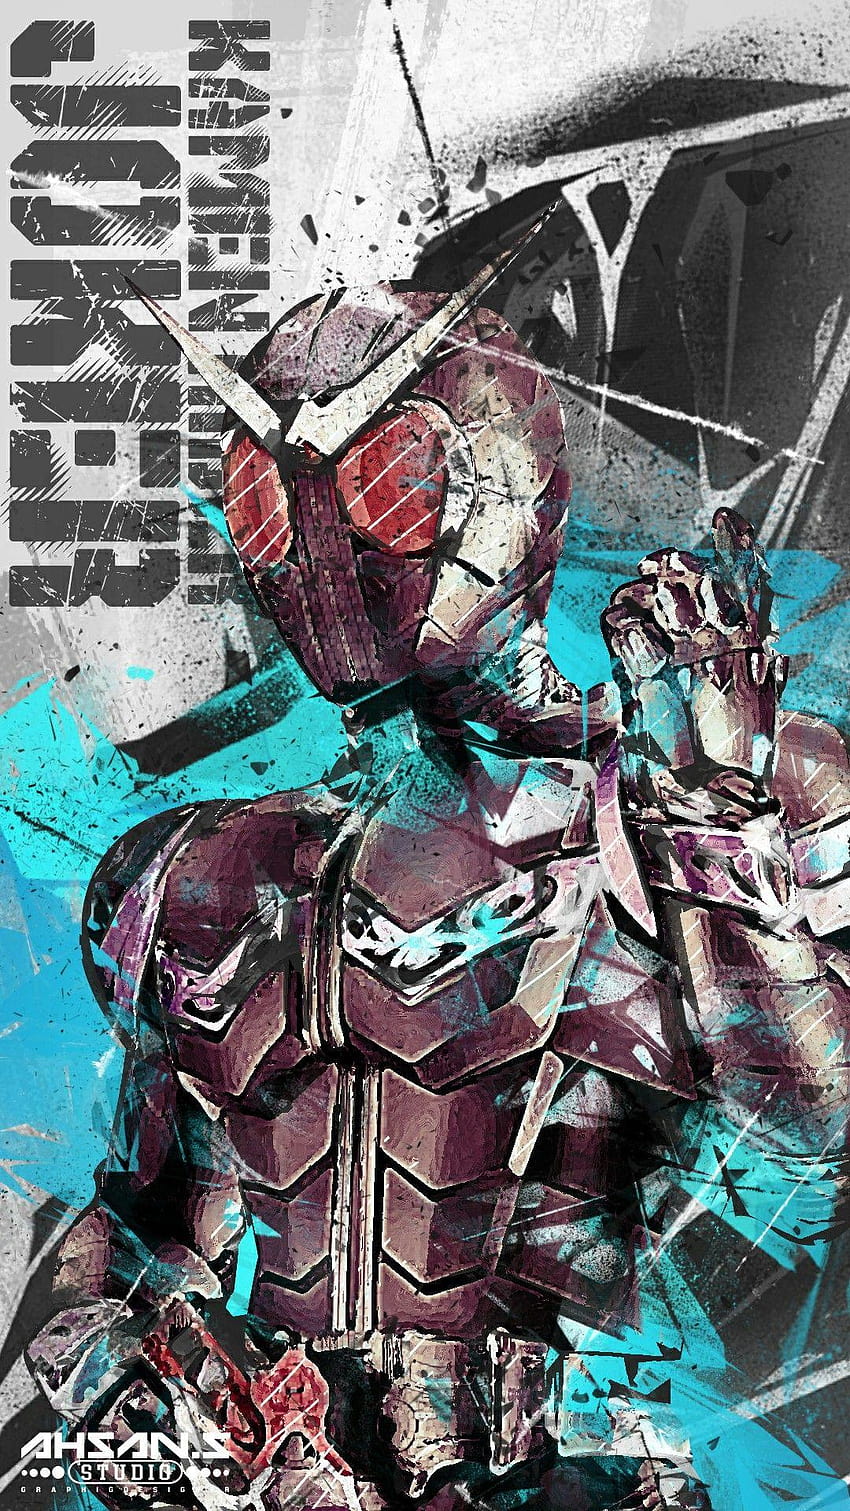 Kamen Rider Joker Kamen Rider W, Kamen Rider Kabuto, kamen rider double android HD phone wallpaper